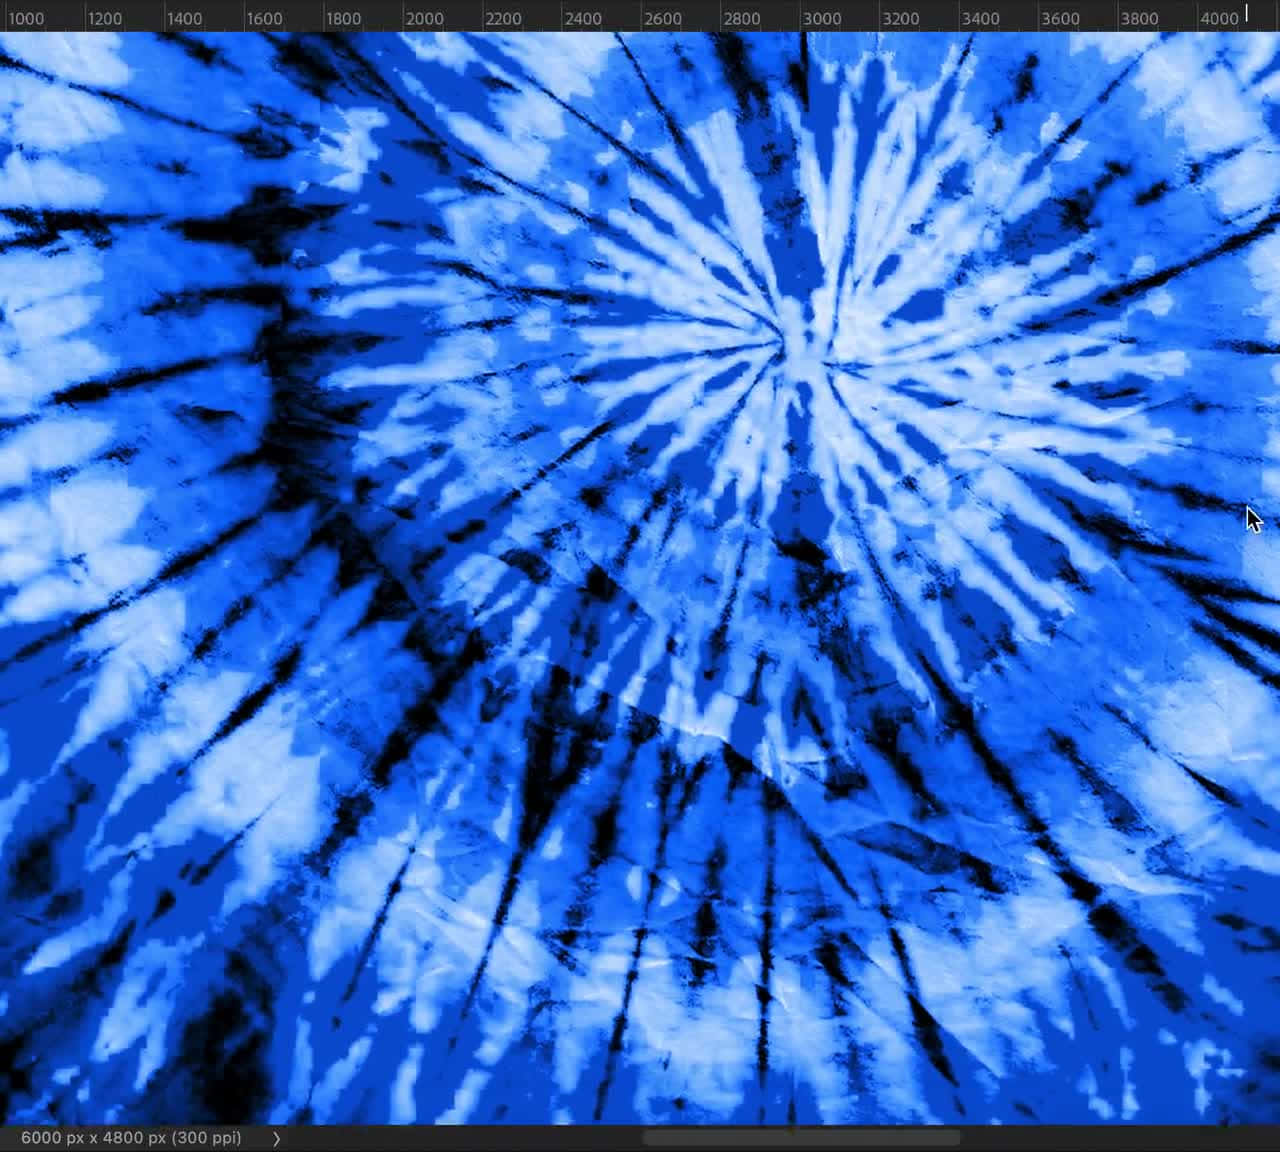 A Blue Tie Dyed Fabric With Black And White Swirls